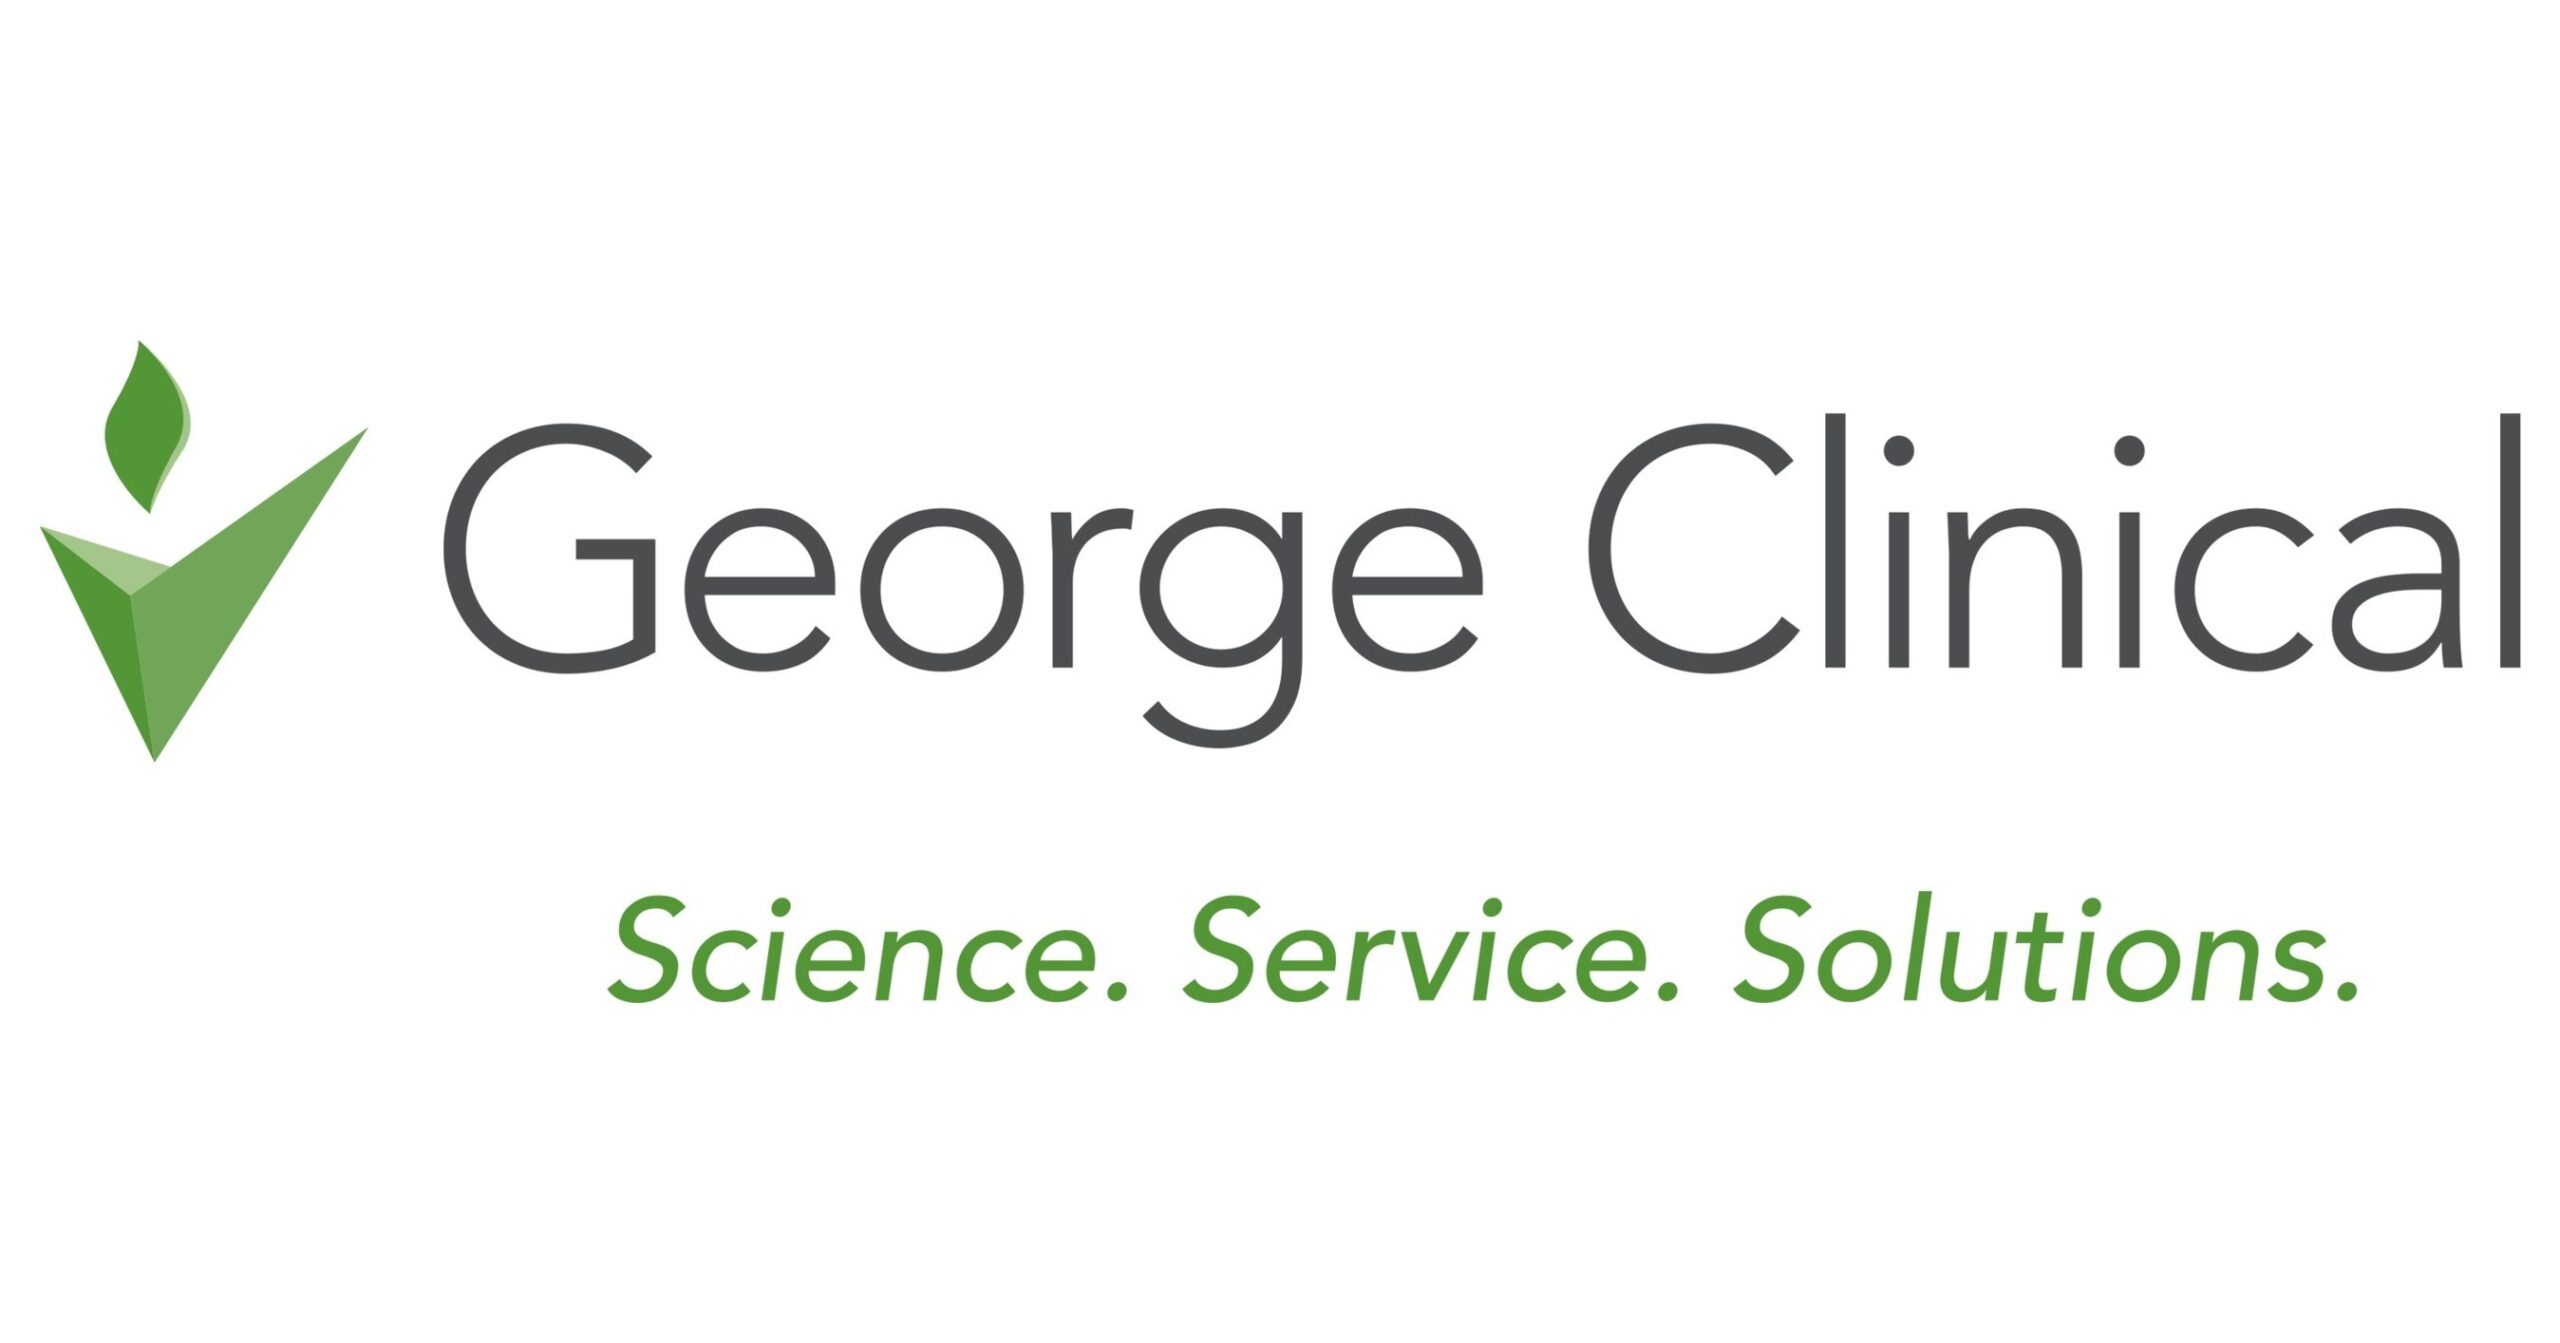 George Clinical Science. Service. Solutions.